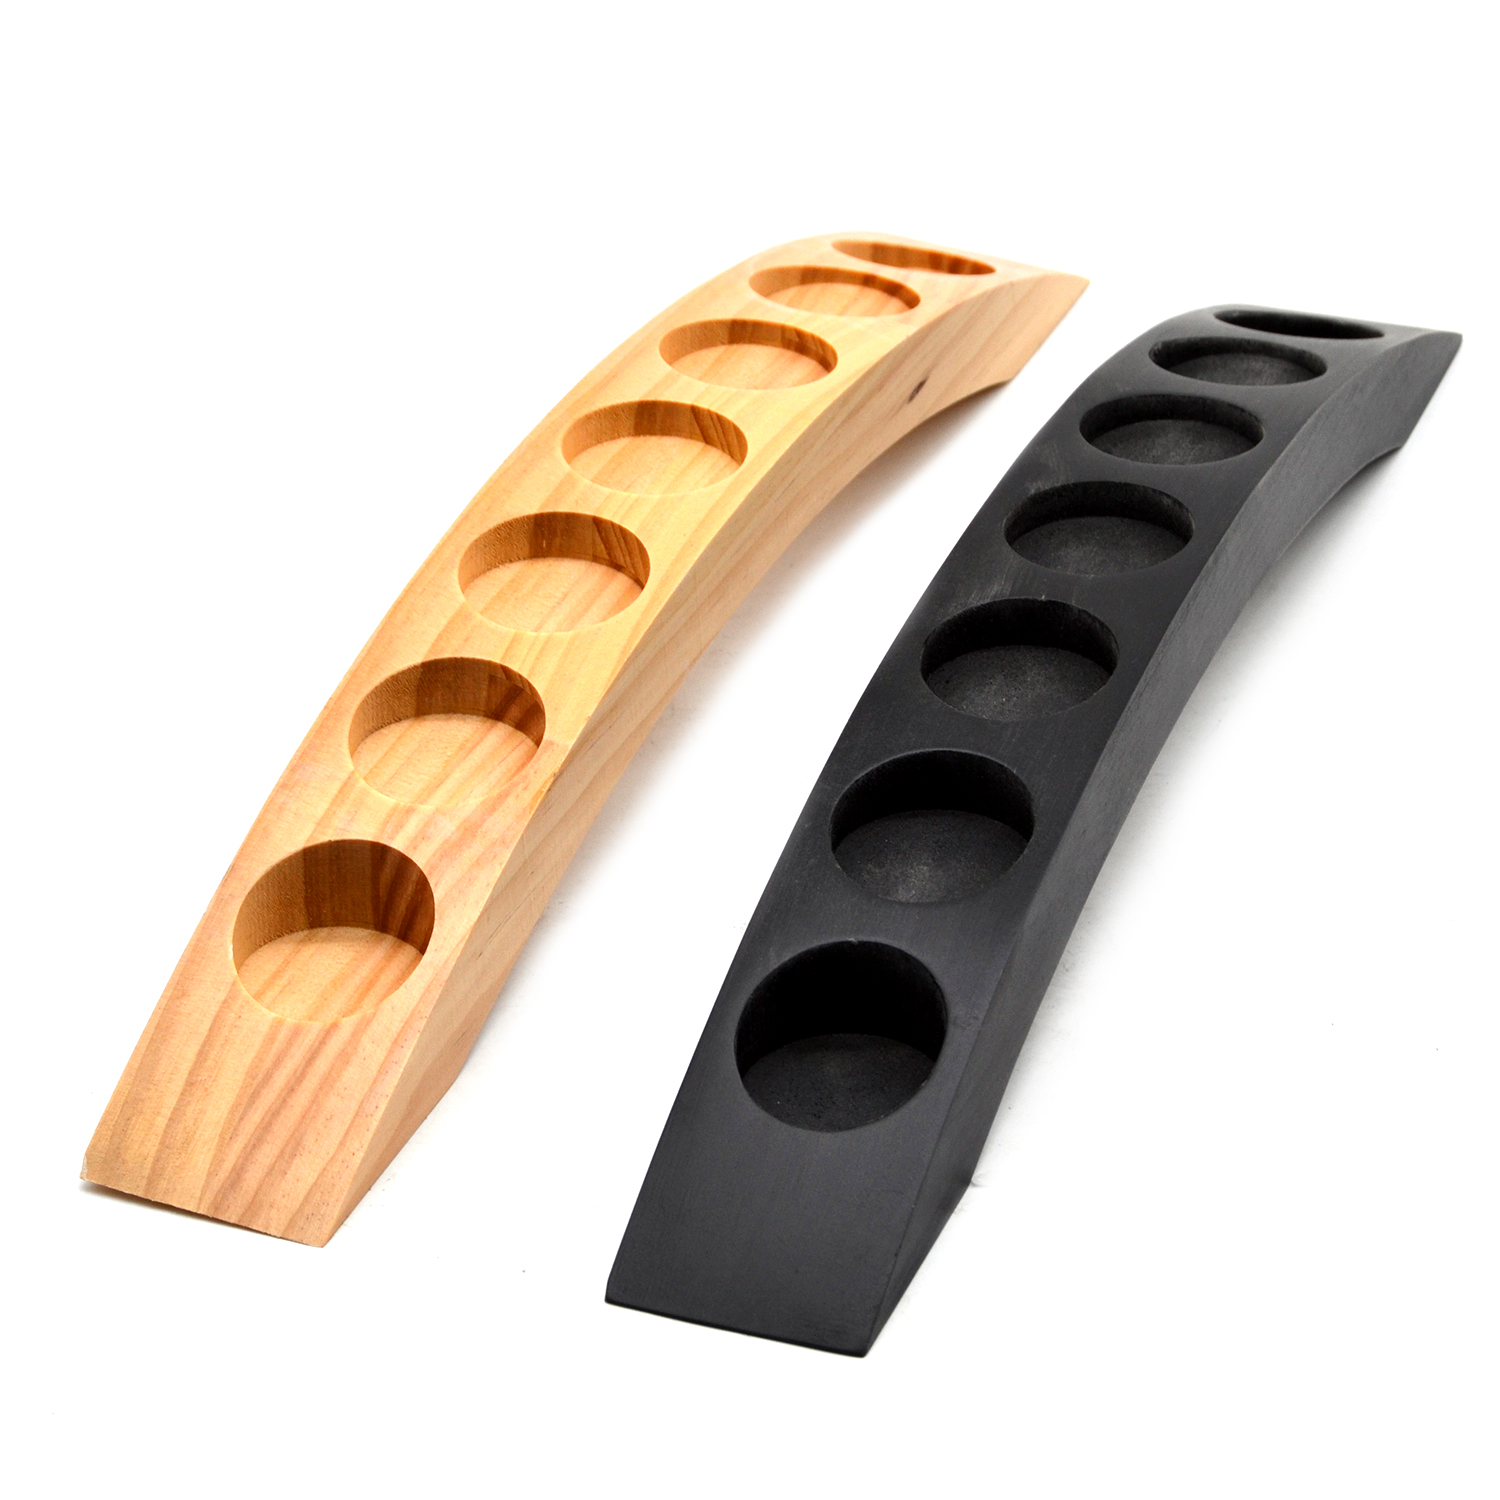 7 seats wooden tealight candle holders